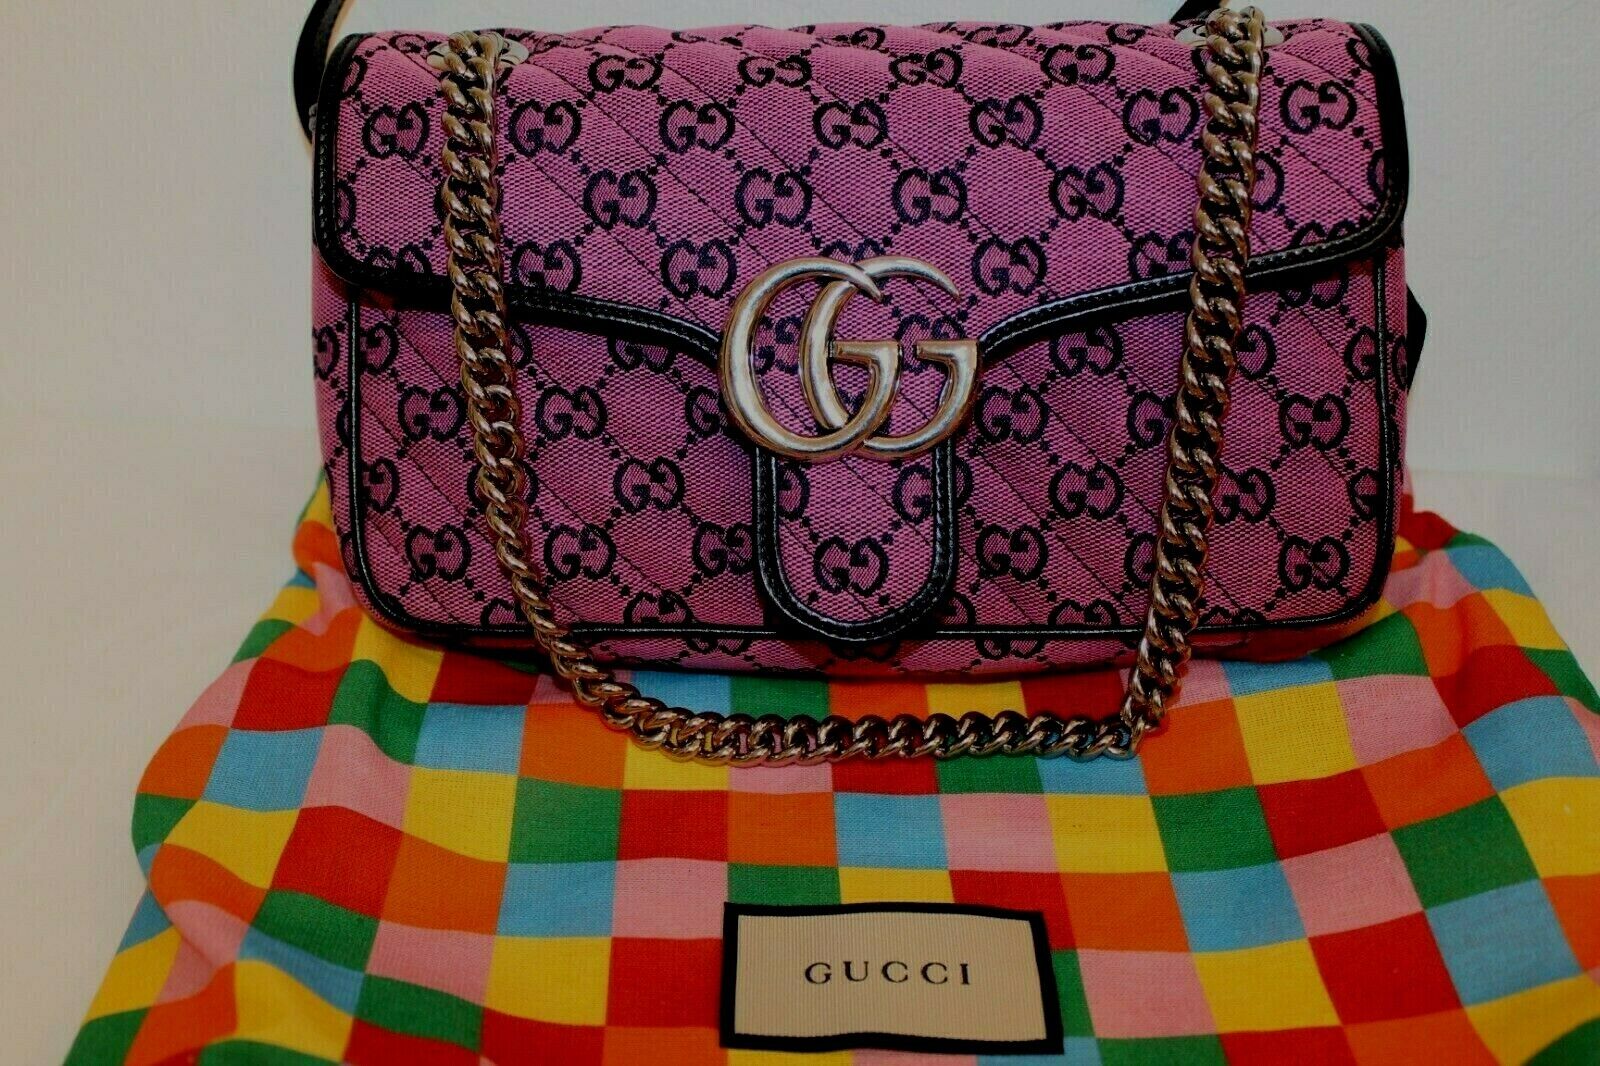 Gucci Mini GG Marmont Shoulder Bag in Pink